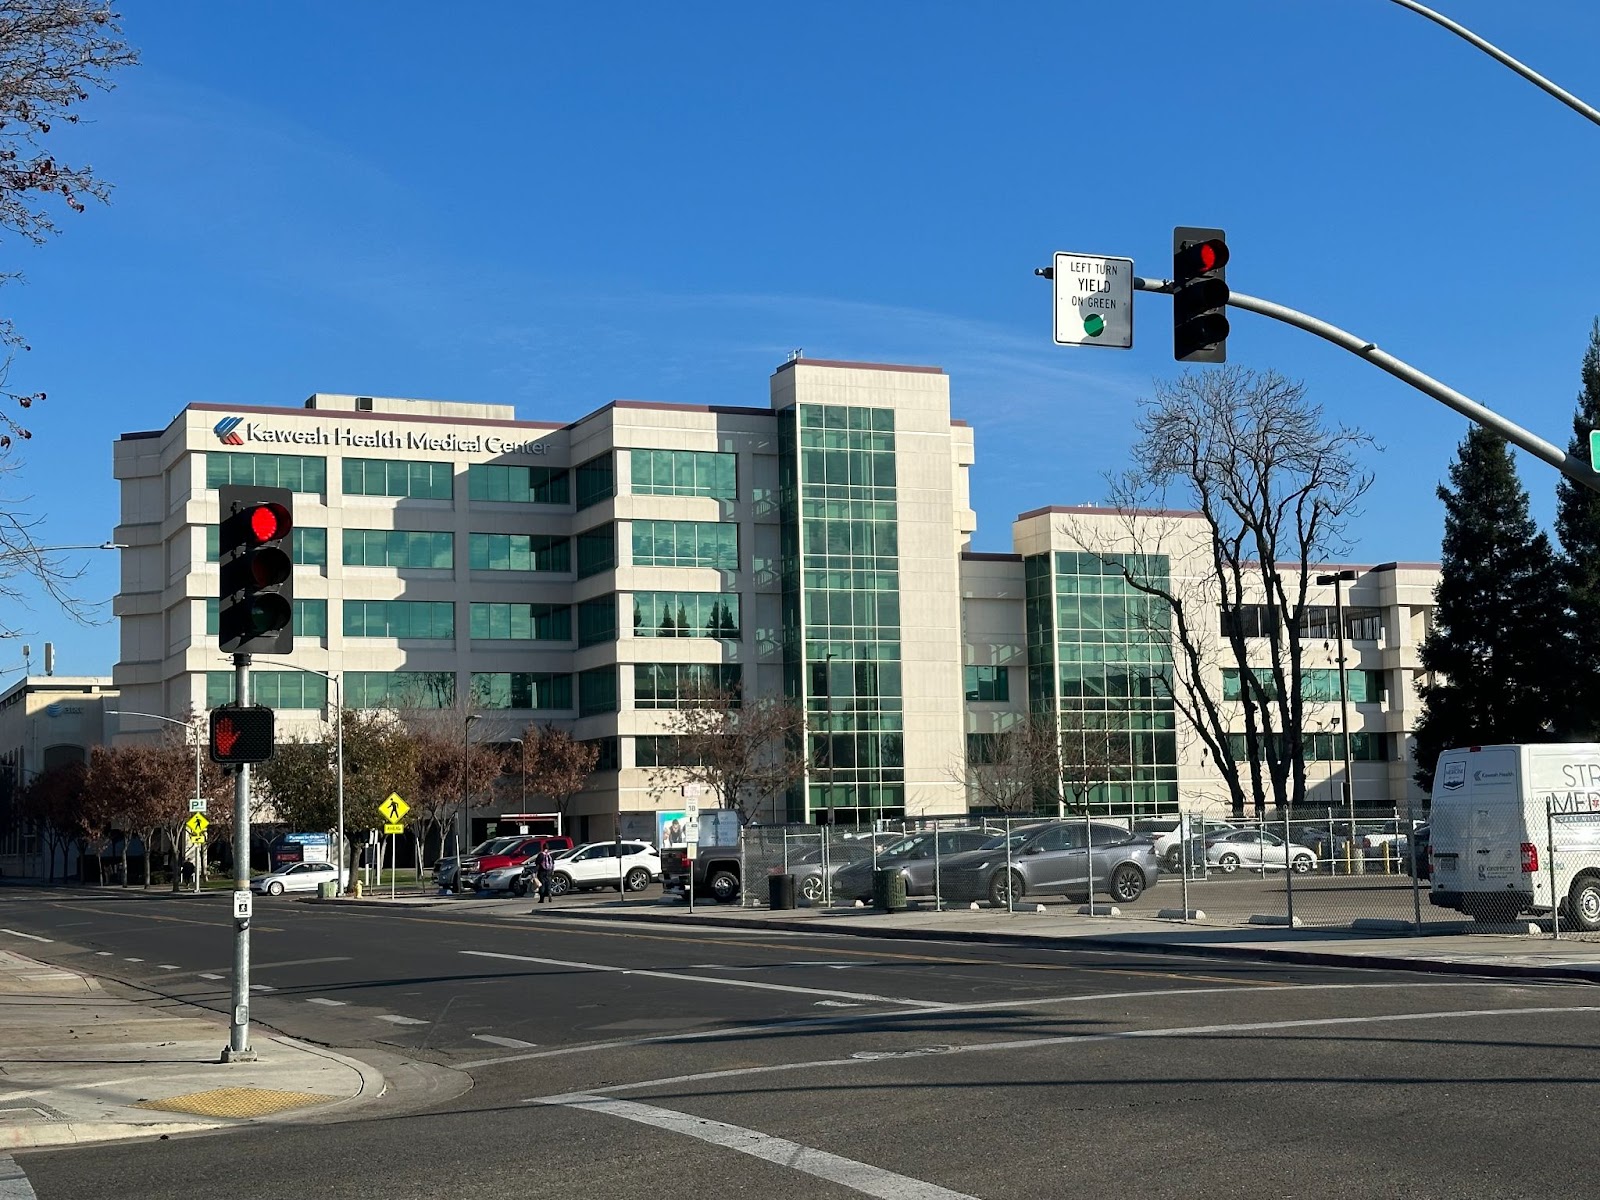 Central Valley hospital provides critical cardiac care with Stanford Med